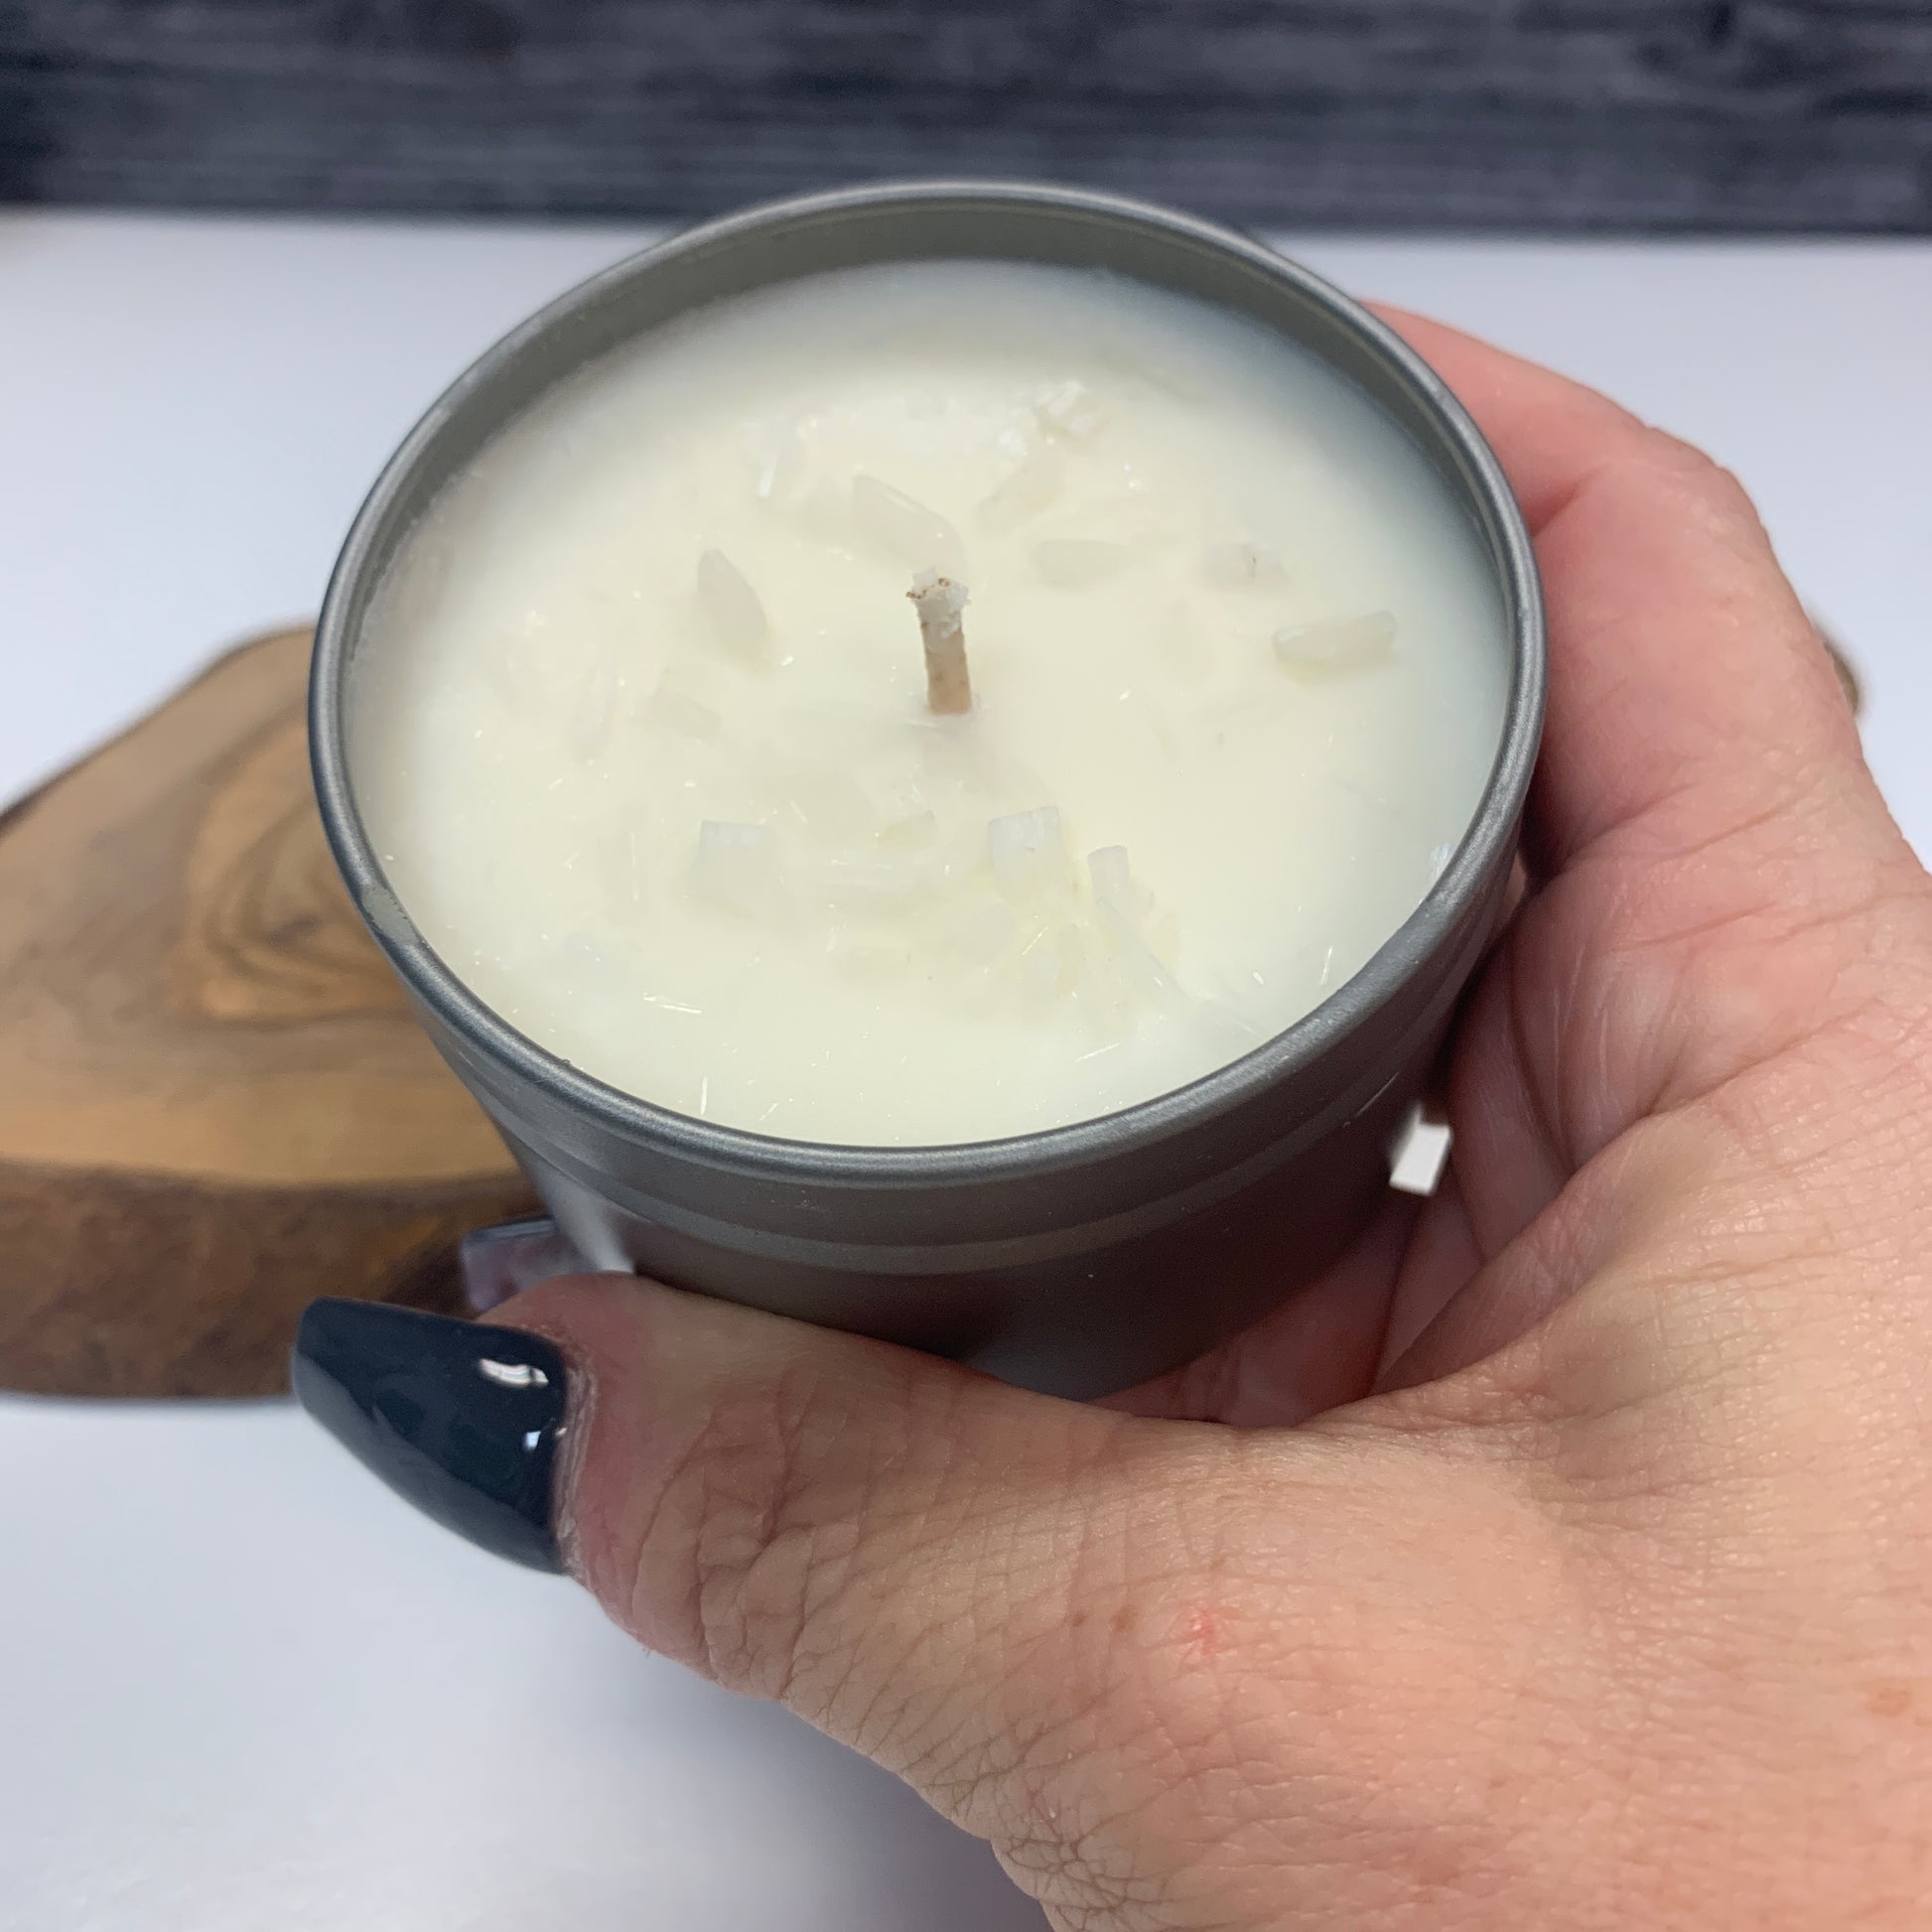 Full Moon Candle With Selenite Travel Tin